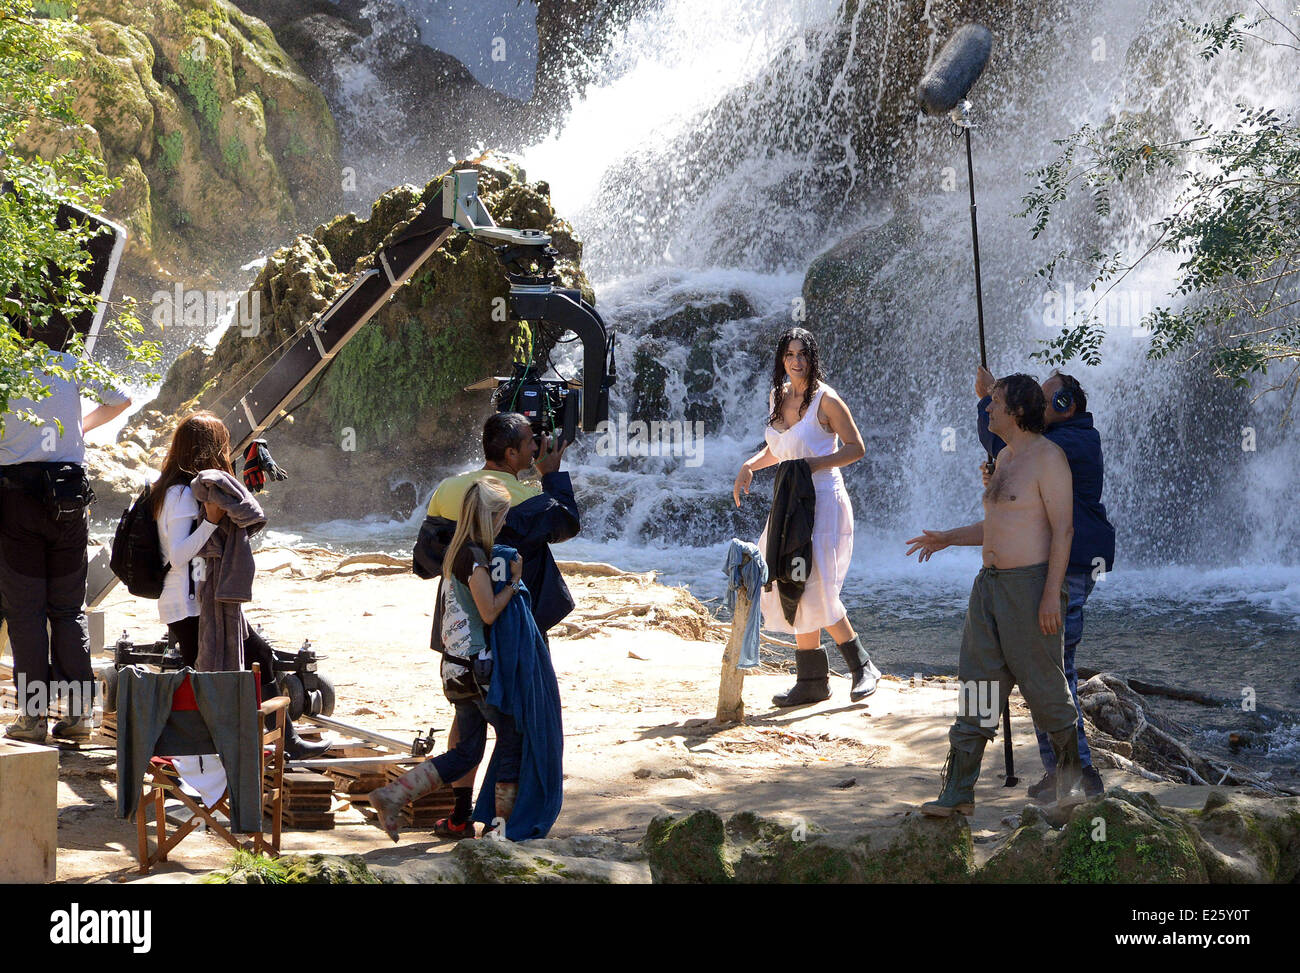 Emir Kusturica and Monica Bellucci filmming 'The Milky Way' movie, at Kravica falls on the Trebizat. Kusturica is a writer, director and actor, and the attractive Italian actress Monica Bellucci, otherwise the director's close friend, plays a role of a Serb woman who was raped by members of the Army of Bosnia and Herzegovina  Featuring: Emir Kusturica,Monica Bellucci Where: Ljubuski, Bosnia and Herzegovina When: 21 Sep 2013 Stock Photo